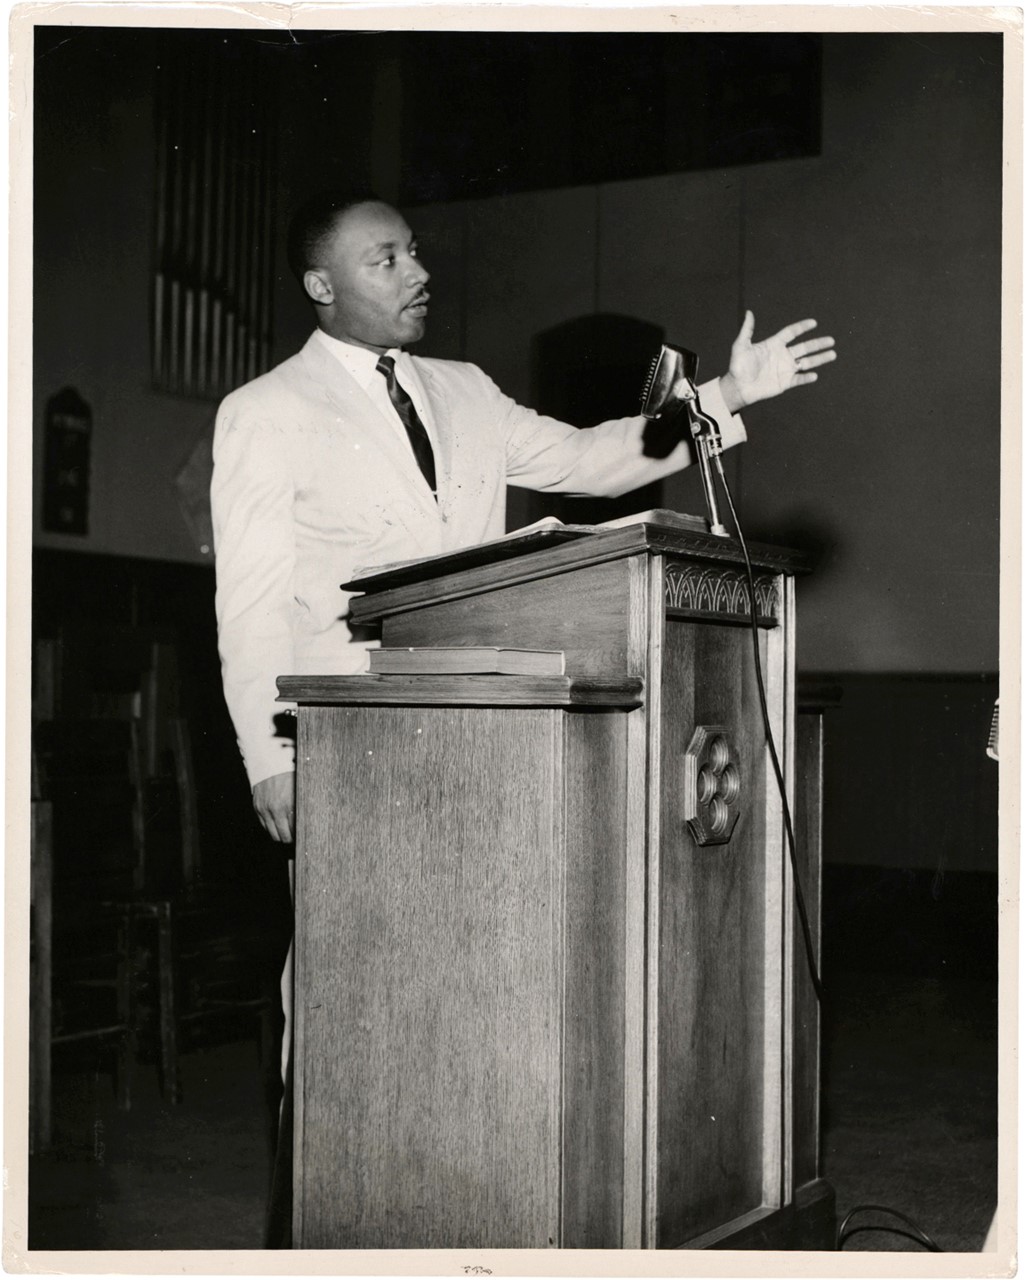 - Dr. Martin Luther King at the Pulpit Photograph (PSA Type I)